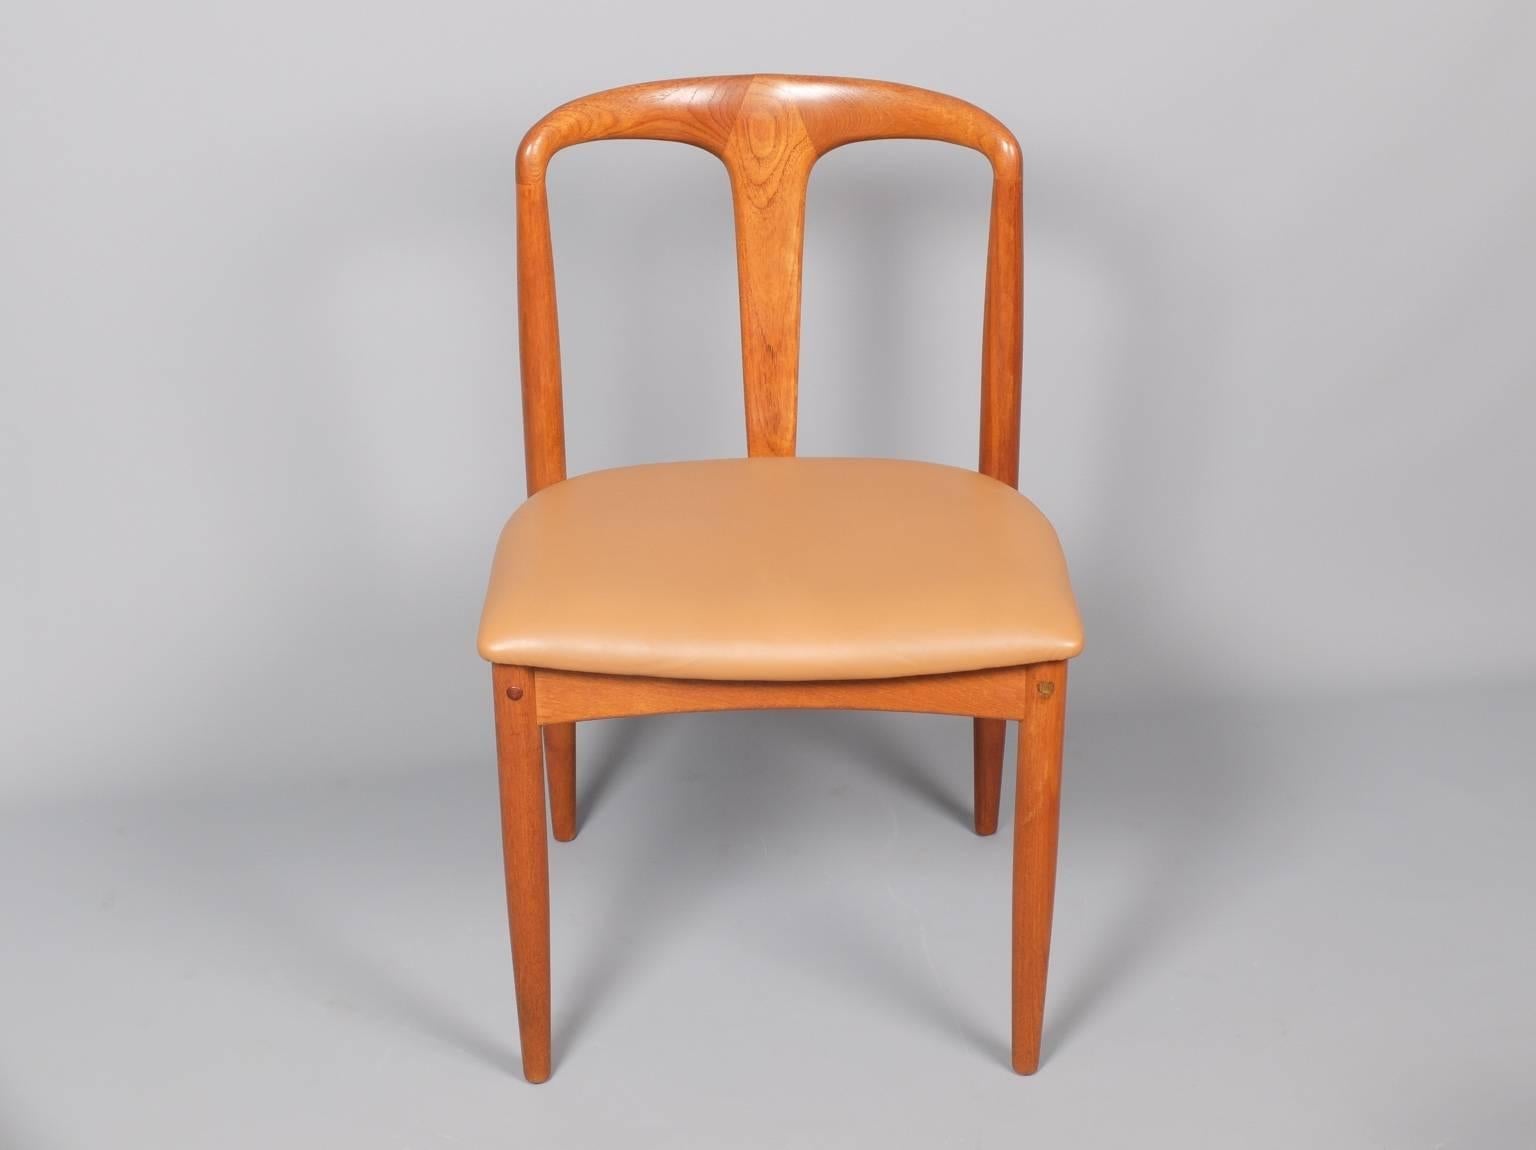 A set of six teak dining chairs, model 'Juliane,' designed by Johannes Andersen and produced by Uldum mobelfabrik, Denmark, circa 1960. The chairs are in excellent condition and the seats are covered in a cognac coloured soft leather. The teak